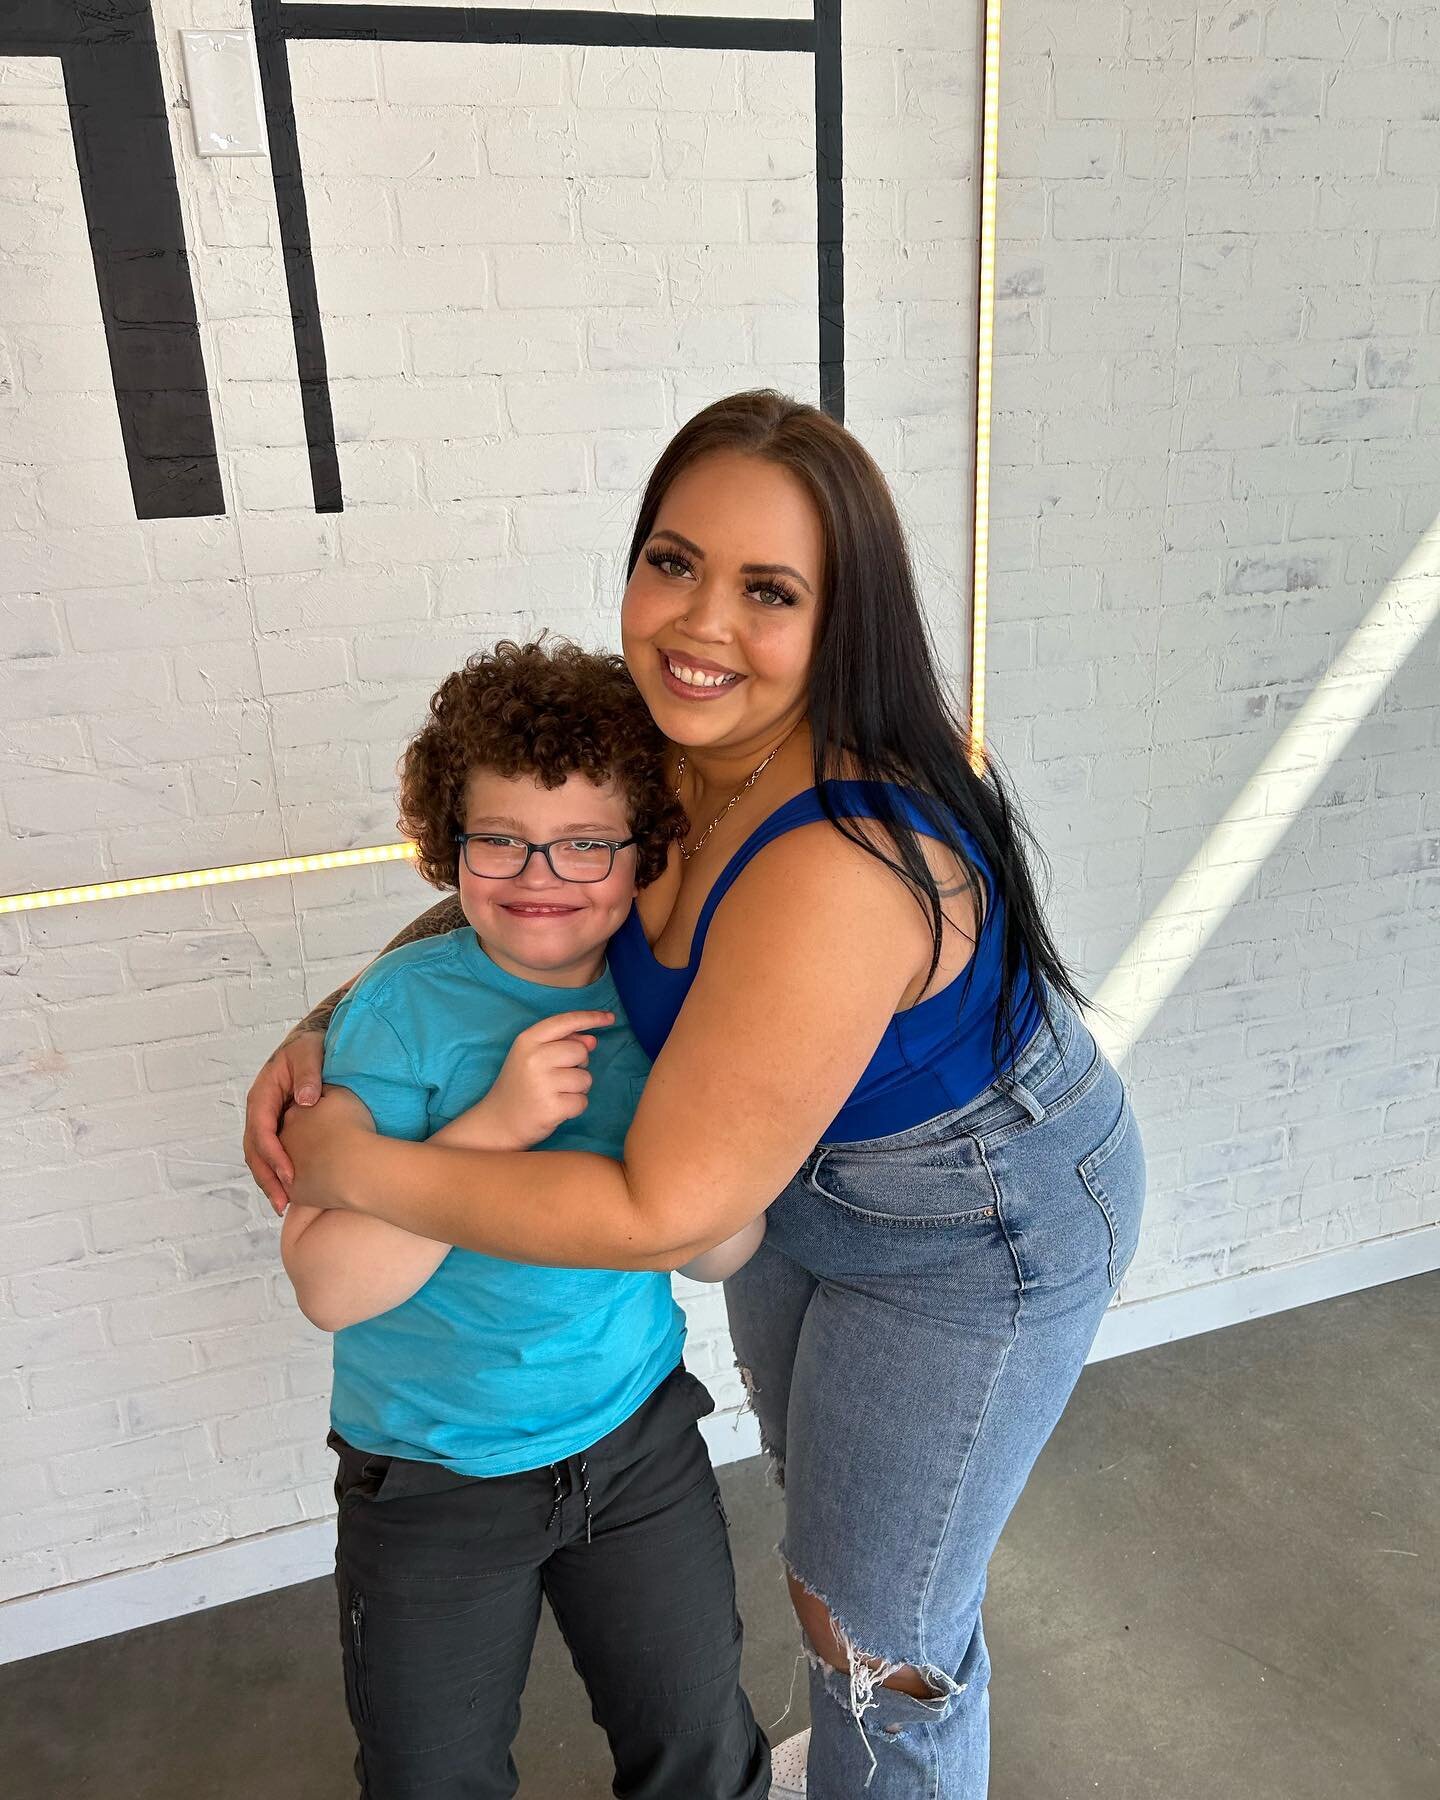 𝓟𝓔𝓓𝓐𝓛 𝓕𝓞𝓡 𝓐 𝓟𝓤𝓡𝓟𝓞𝓢𝓔💙

Michaela, or &ldquo;Mickie&rdquo; has been a long time HH member and recently joined us as studio manager. 

Mickie&rsquo;s oldest son, Landon &ldquo;Dan&rdquo;, was diagnosed with Autism at the age of 3.  Dan j